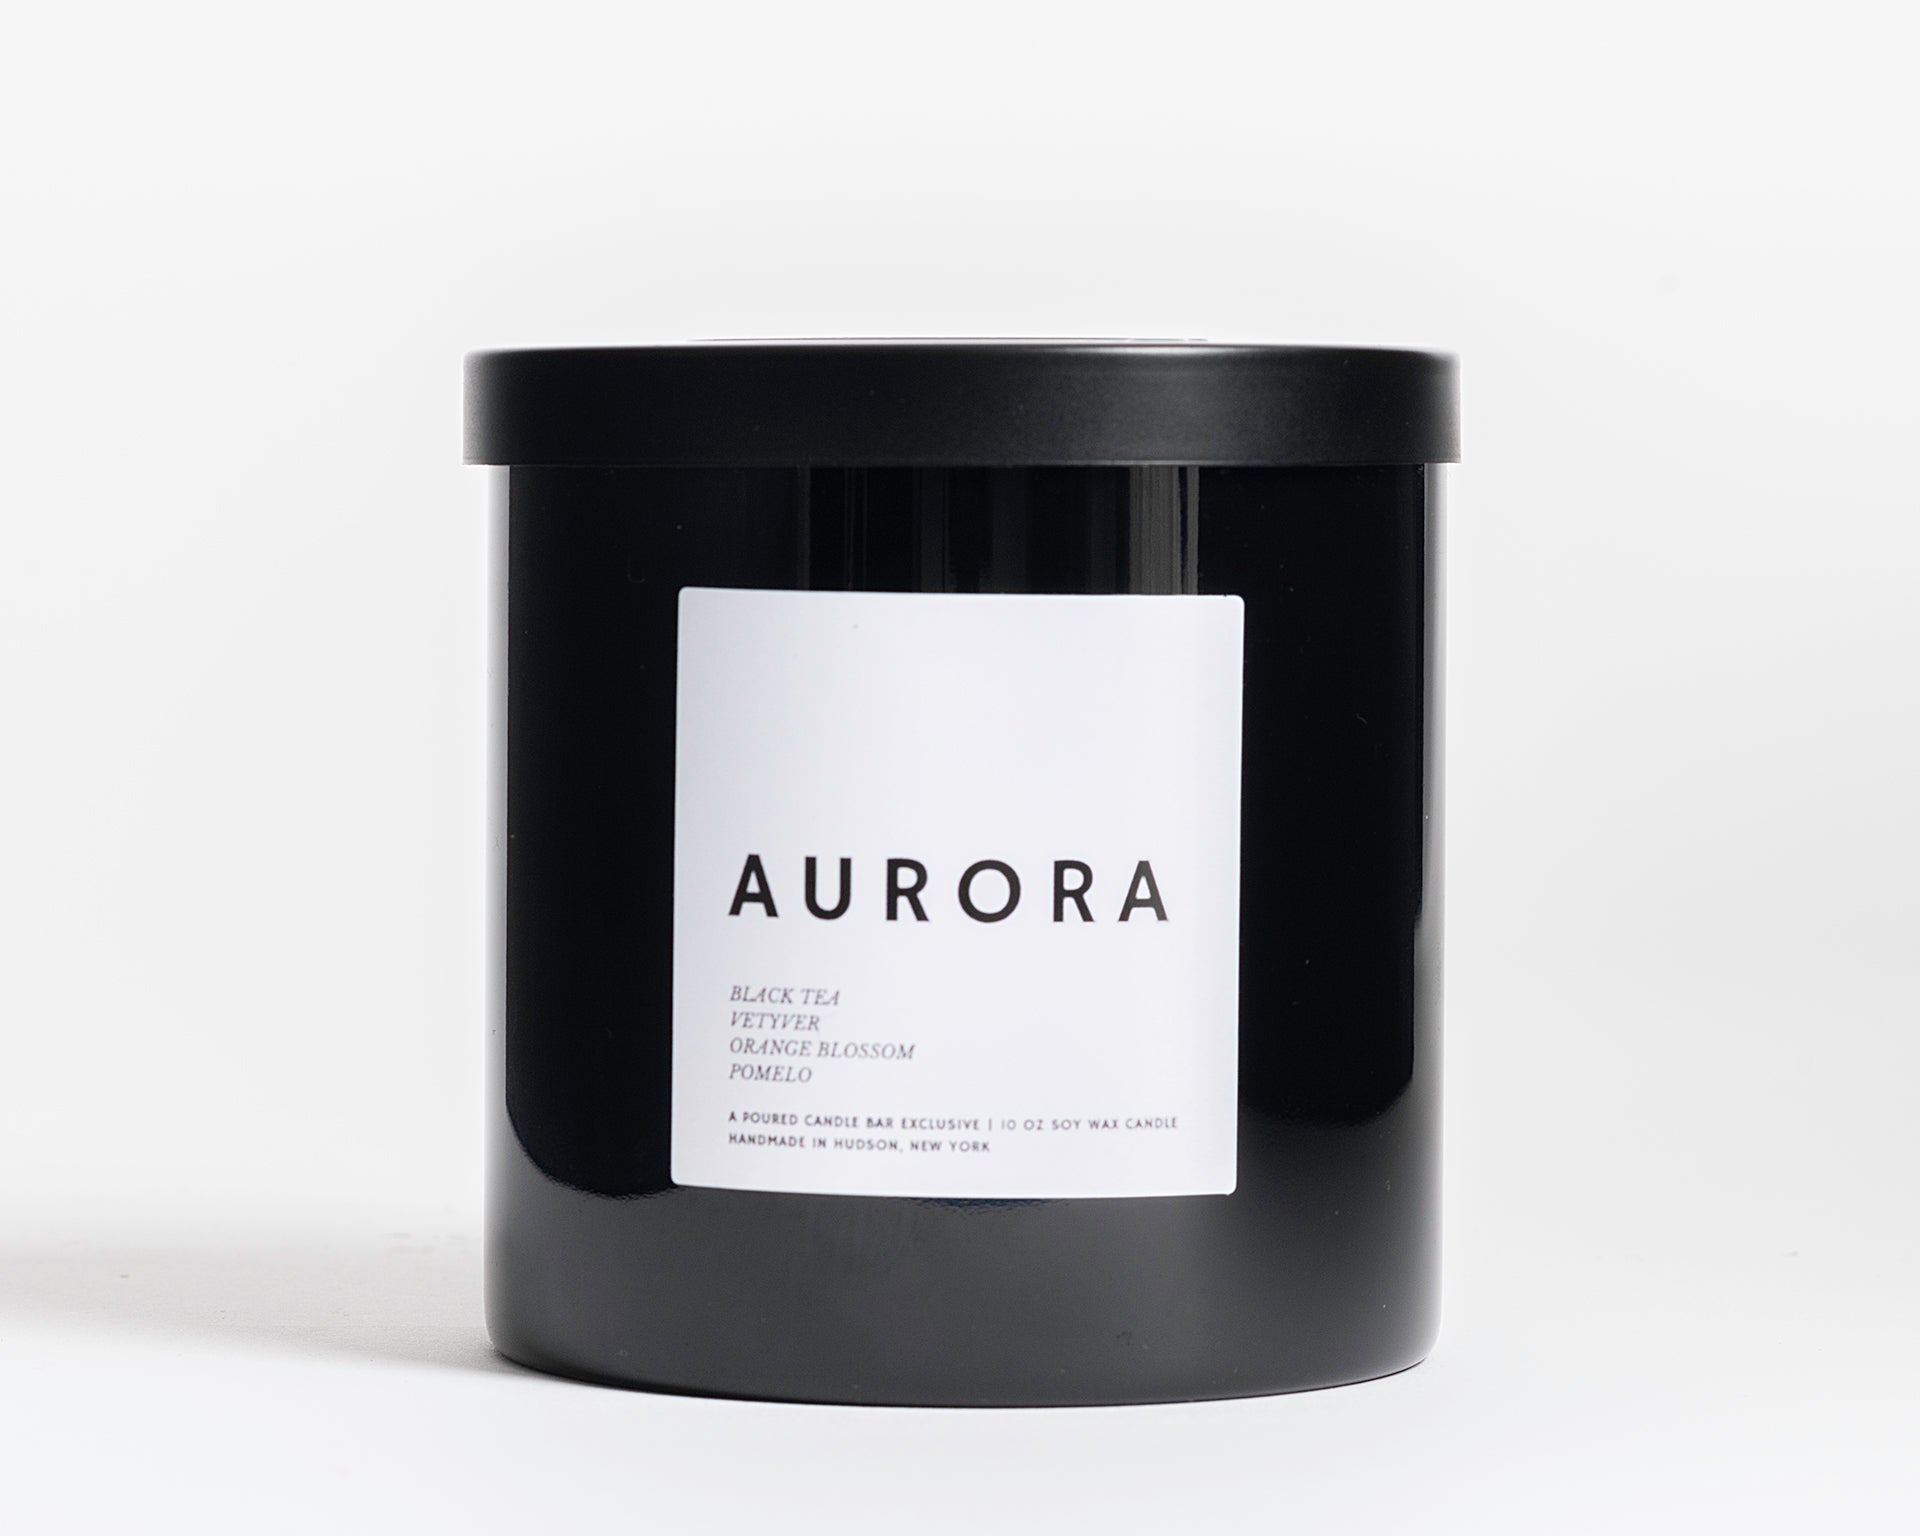 10 oz 100% soy wax candles in a black glass vessel. Profile Description: Faintly sweet + herbal, with subtle hits of white floral + citrus  Notes: Black Tea, Vetyver Root, Orange Blossom, Pomelo 